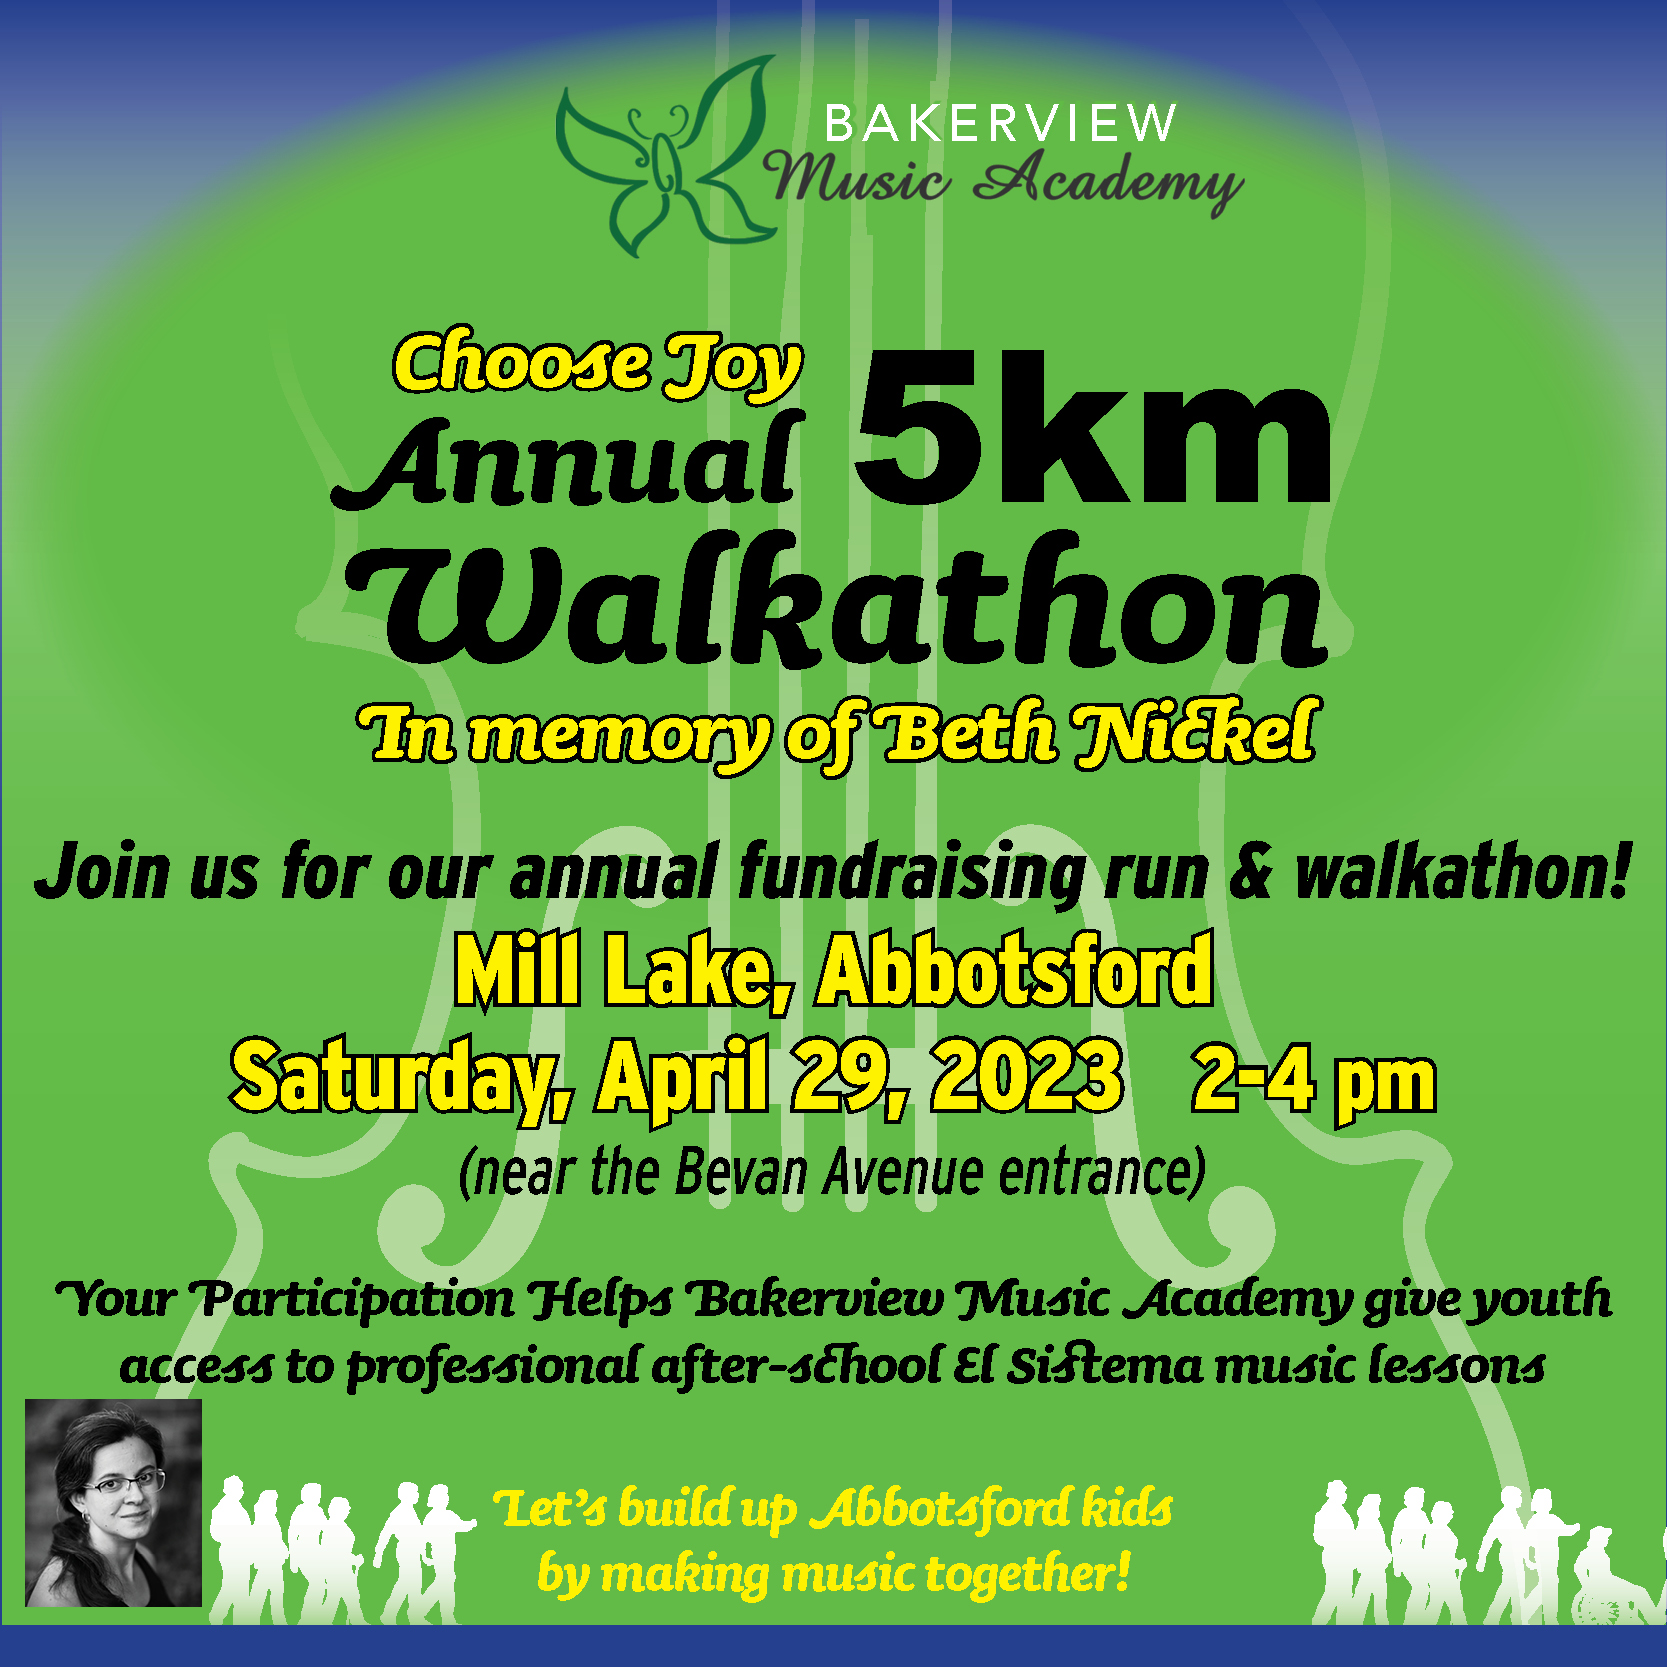 You’re invited to join or support our annual Choose Joy Walkathon on April 29th 